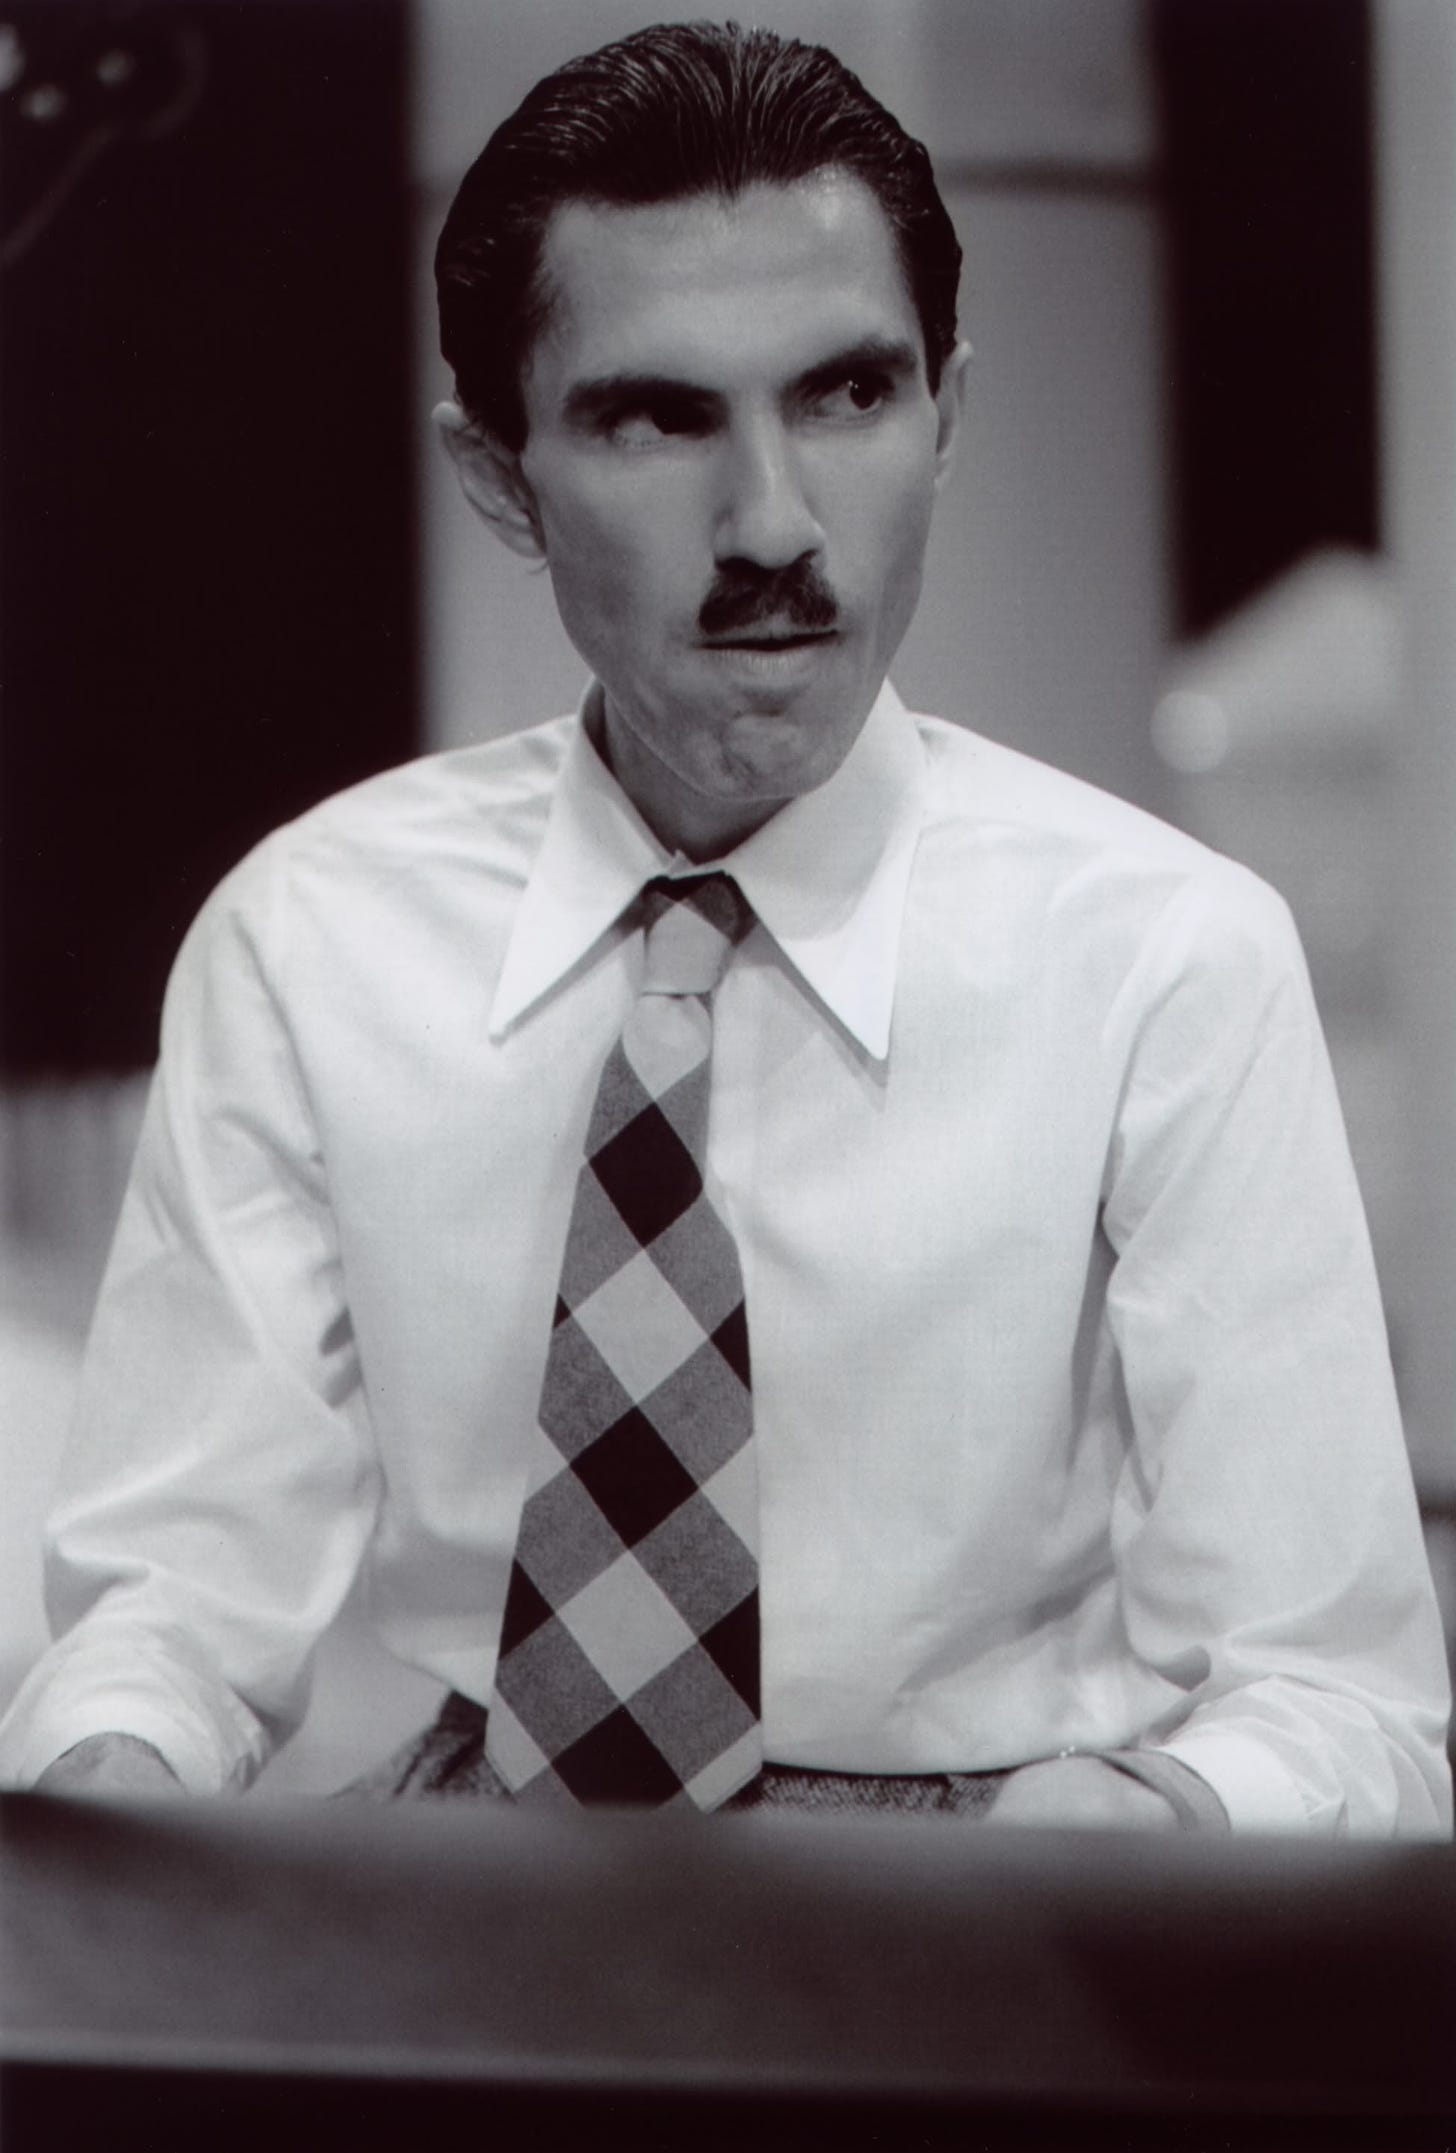 Ron Mael from Sparks | Sparks band, Rock band photos, Spark